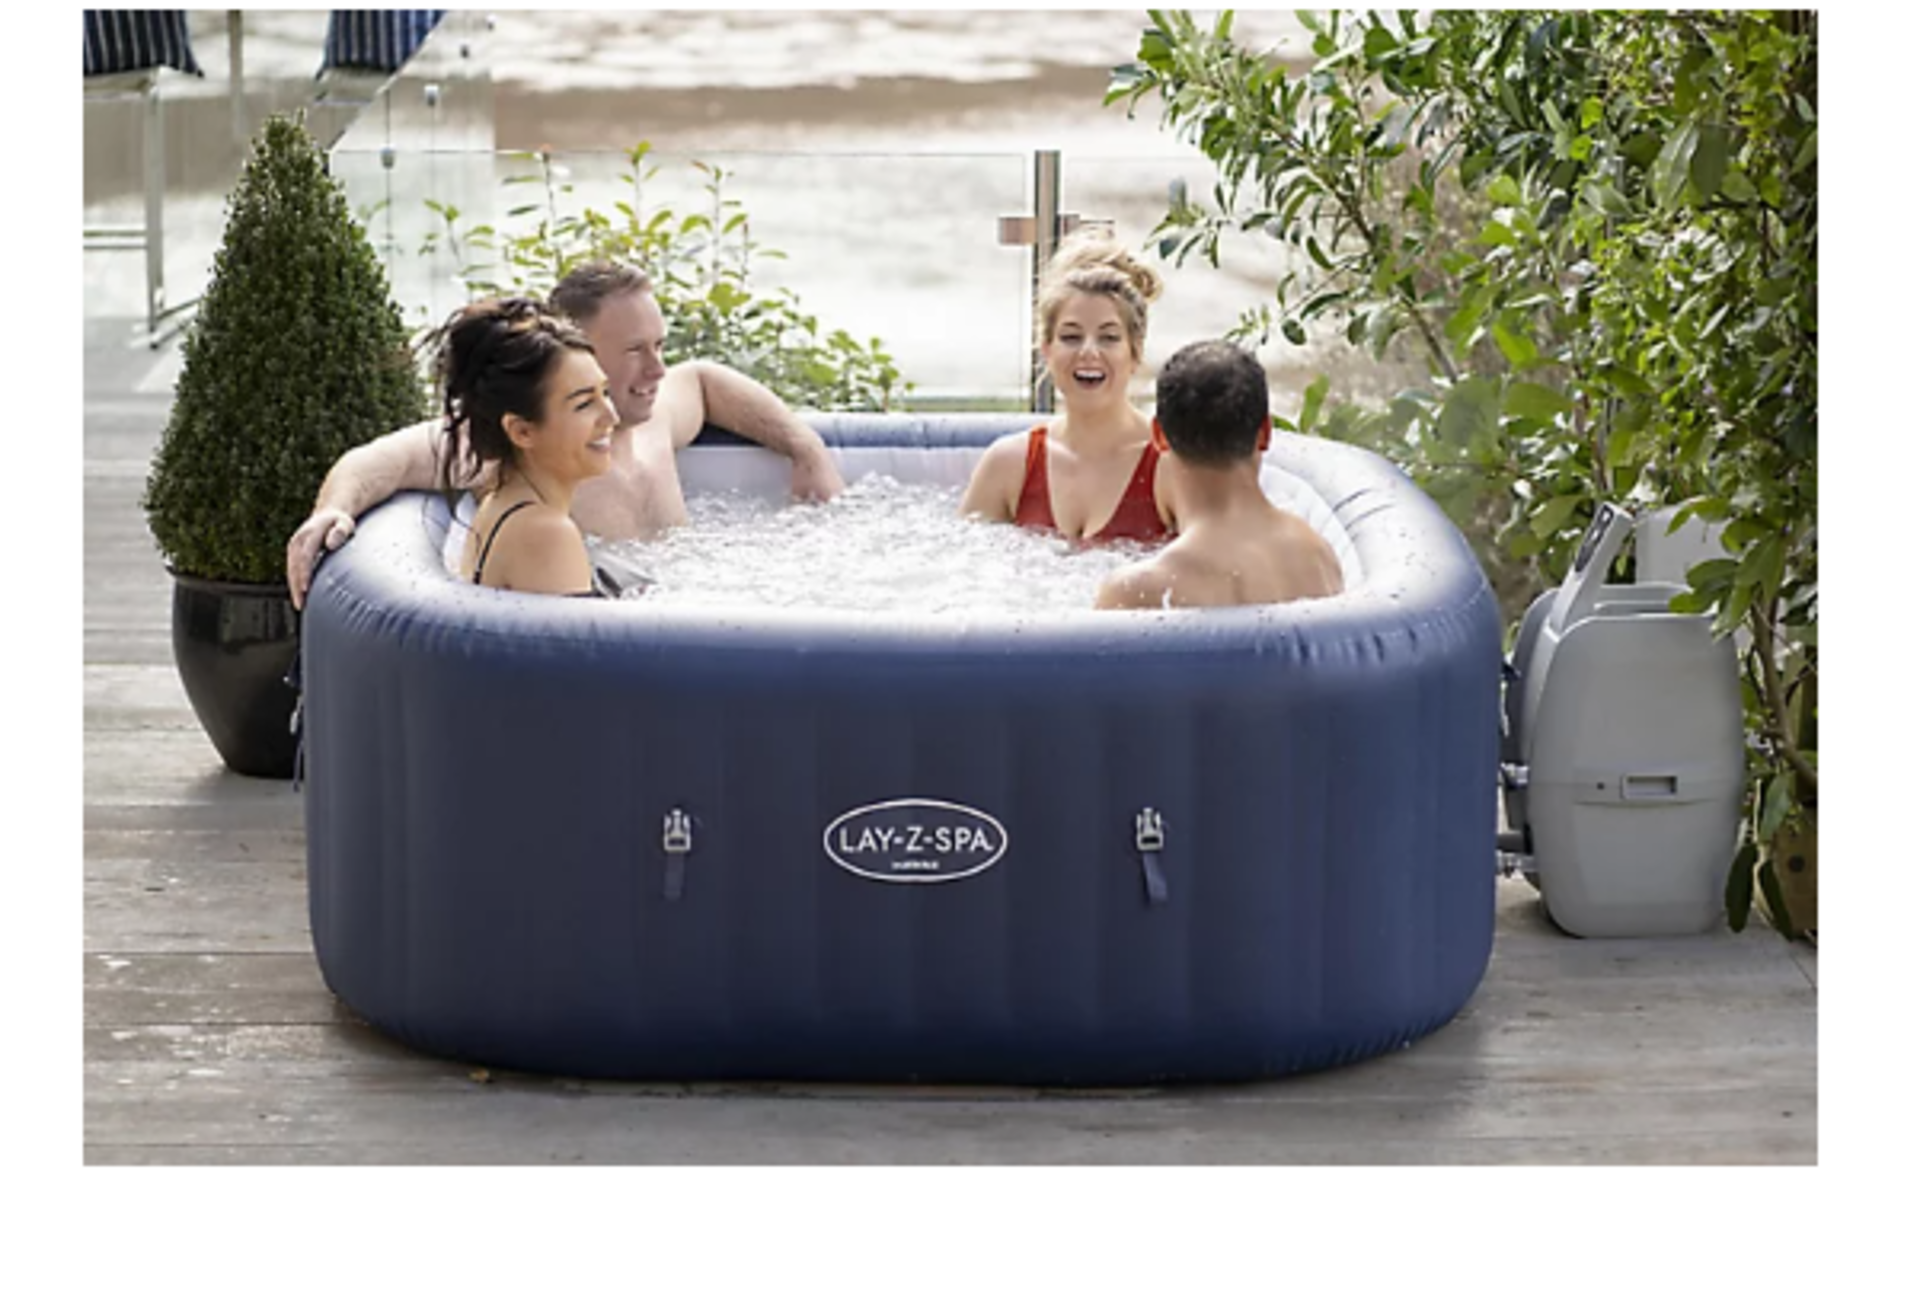 Lay-Z-Spa Hawaii Airjet 6 person Inflatable Hot Tub. - ER.RRP £450.00. The Lay-Z-Spa Hawaii - Image 2 of 2